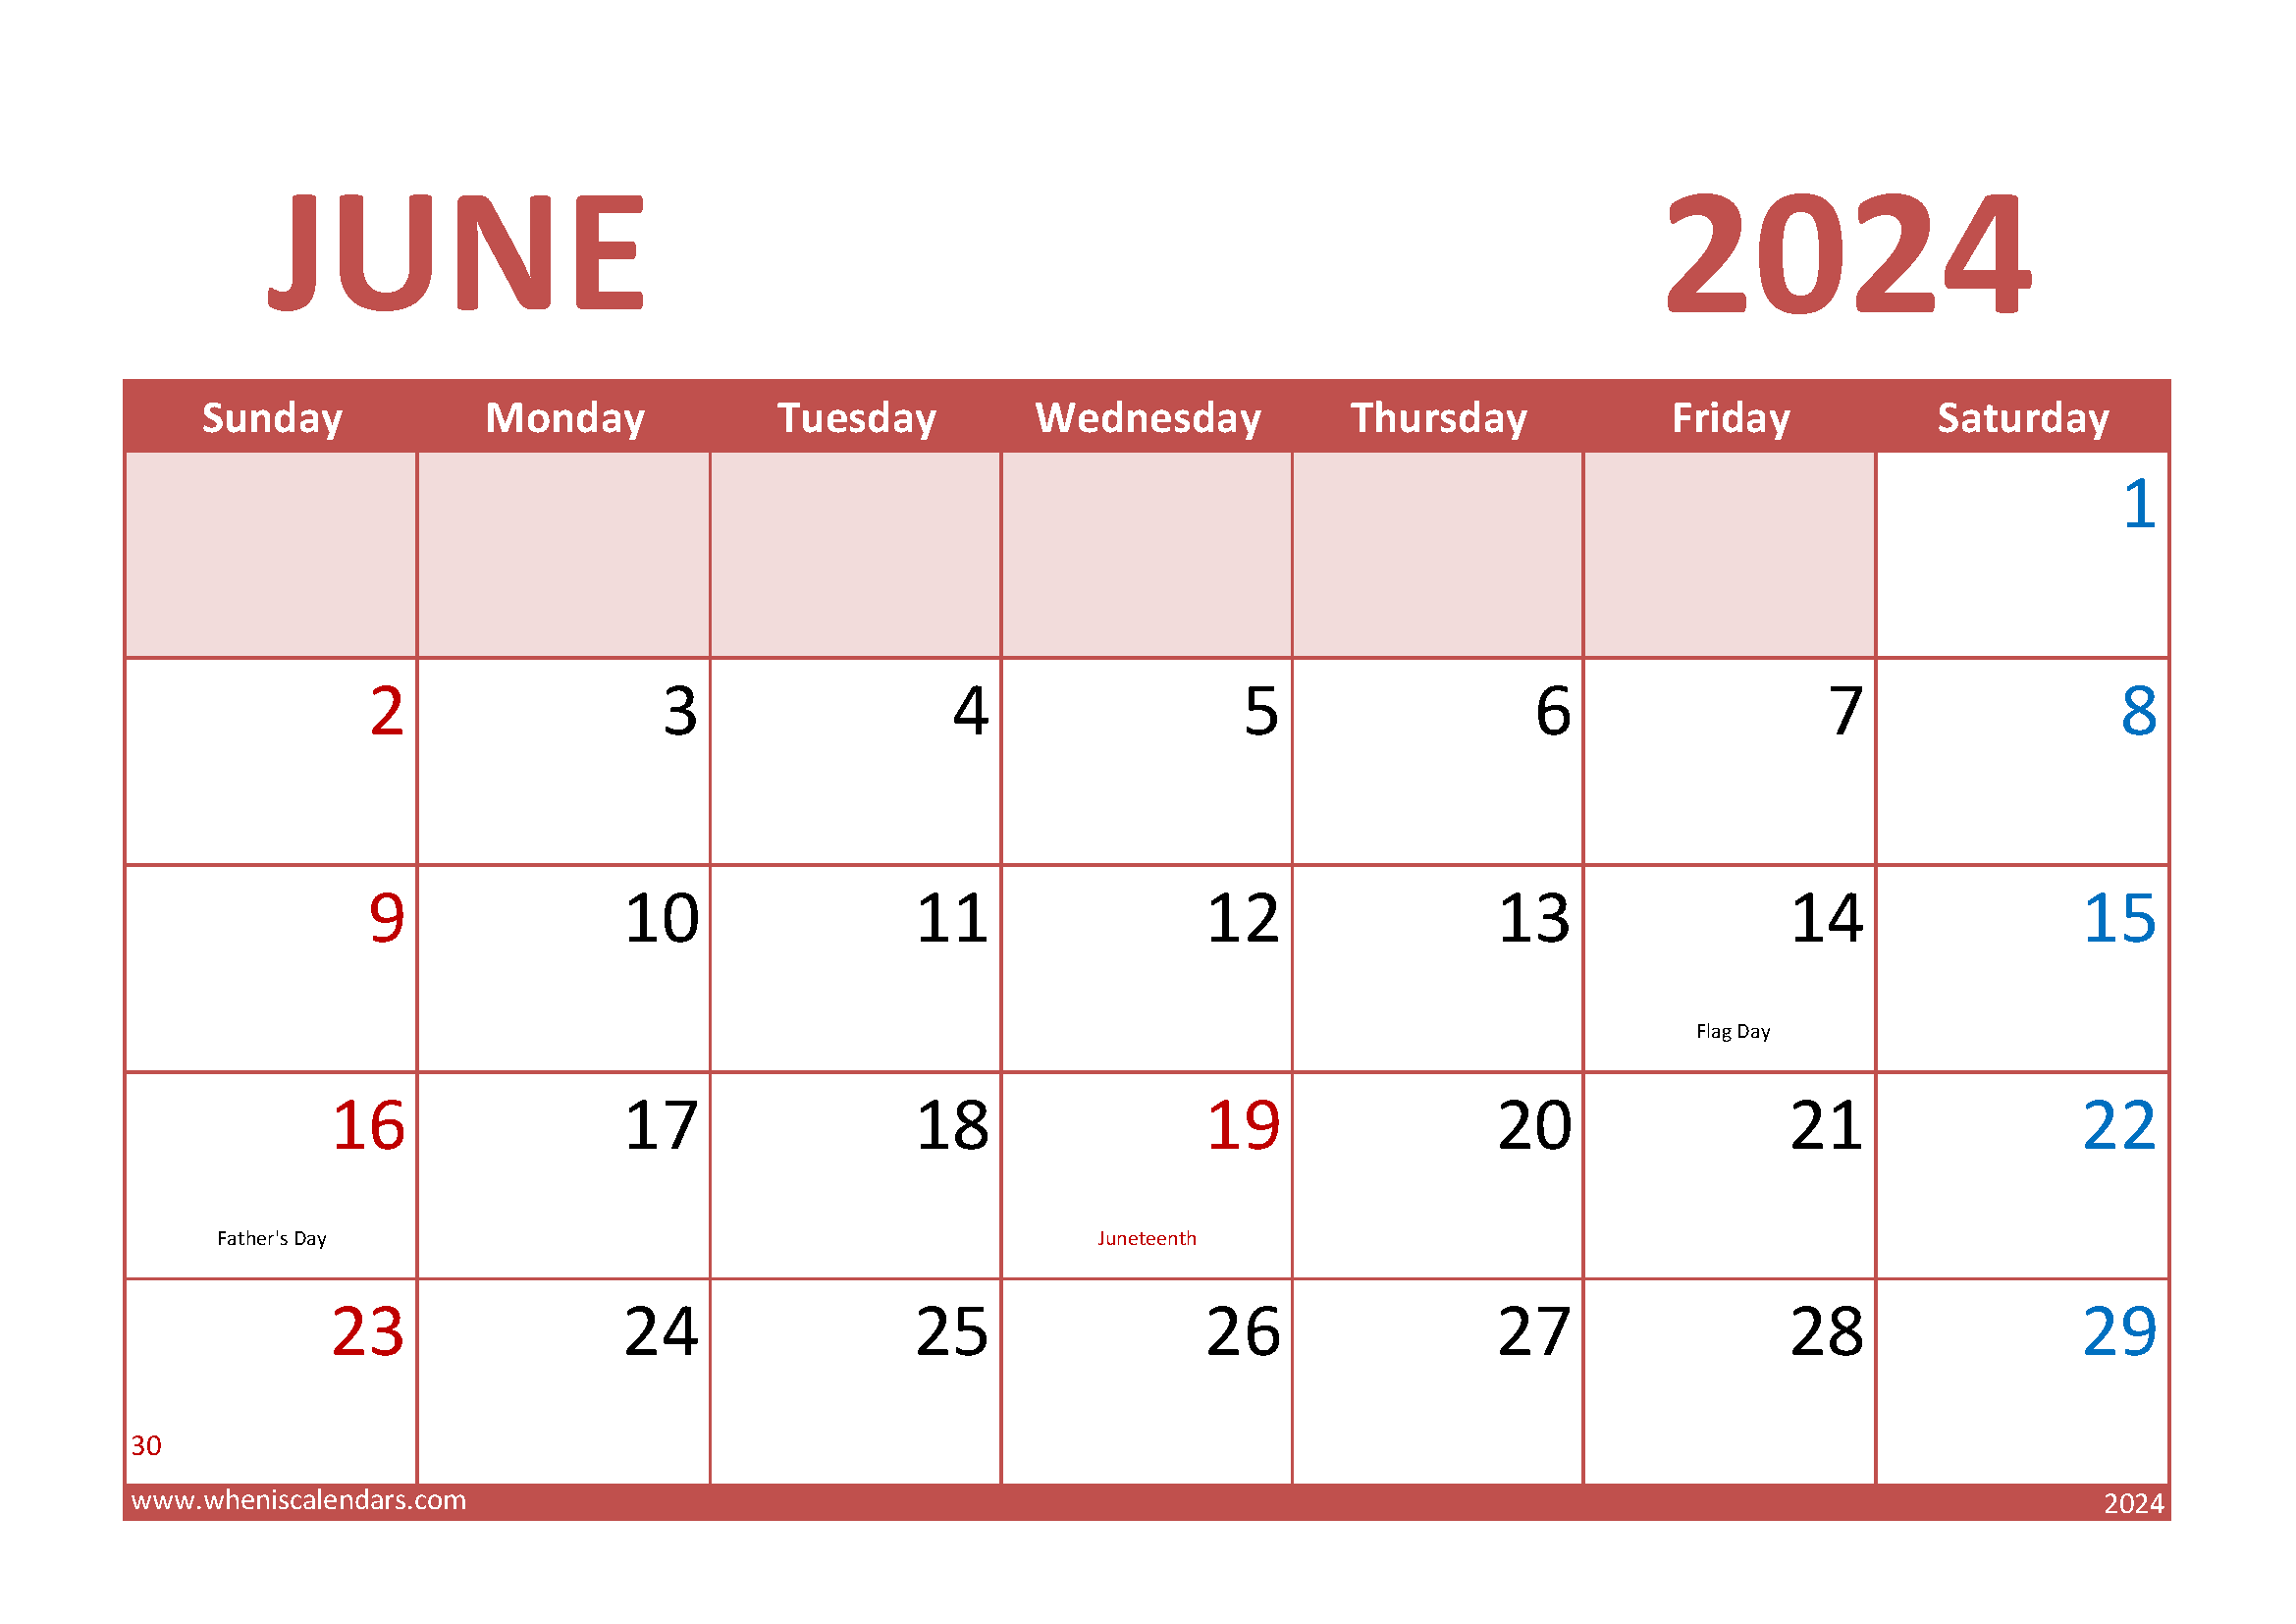 Special Days in June 2024